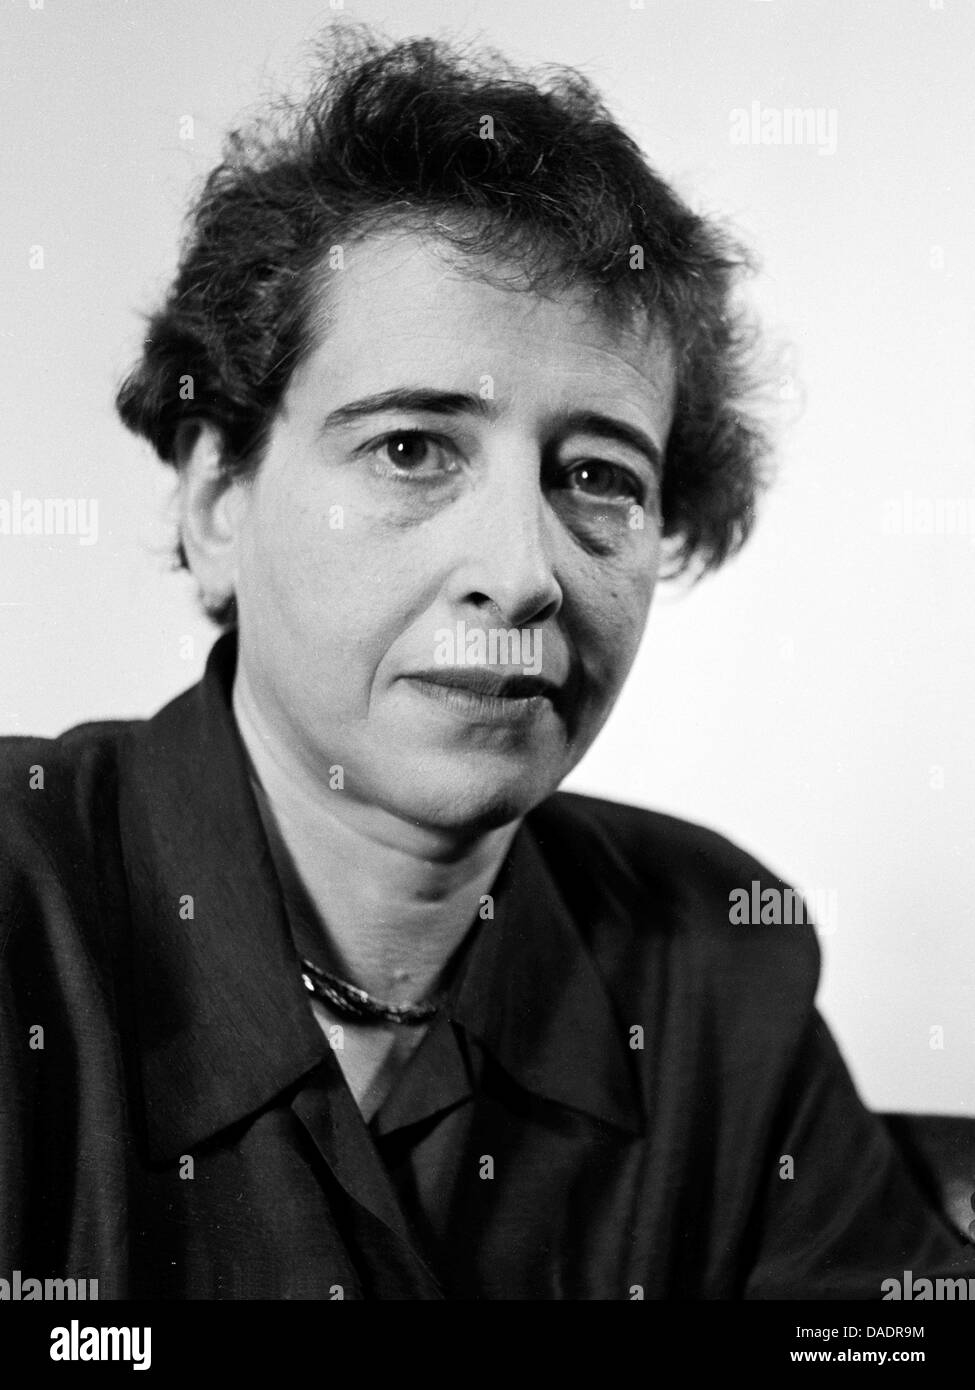 Hannah Arendt i 1949. Portrait by photographer Fred Stein (1909-1967) who emigrated 1933 from Nazi Germany to France and finally to the USA. Stock Photo